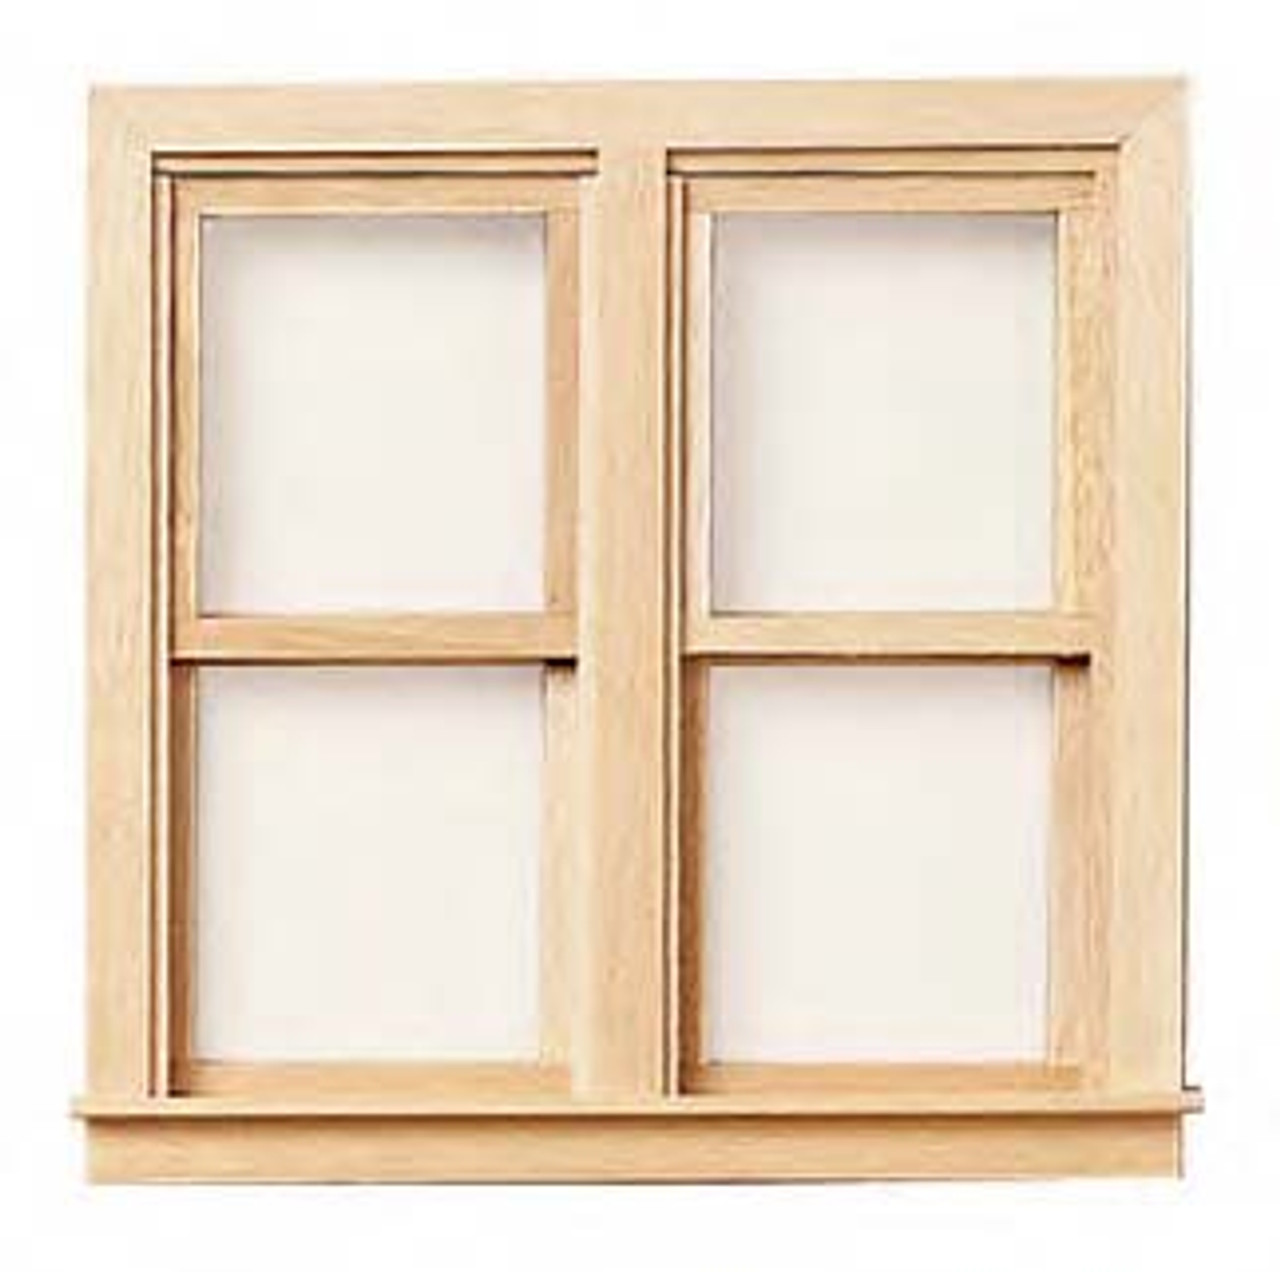 Standard Double Hung Side-by-Side